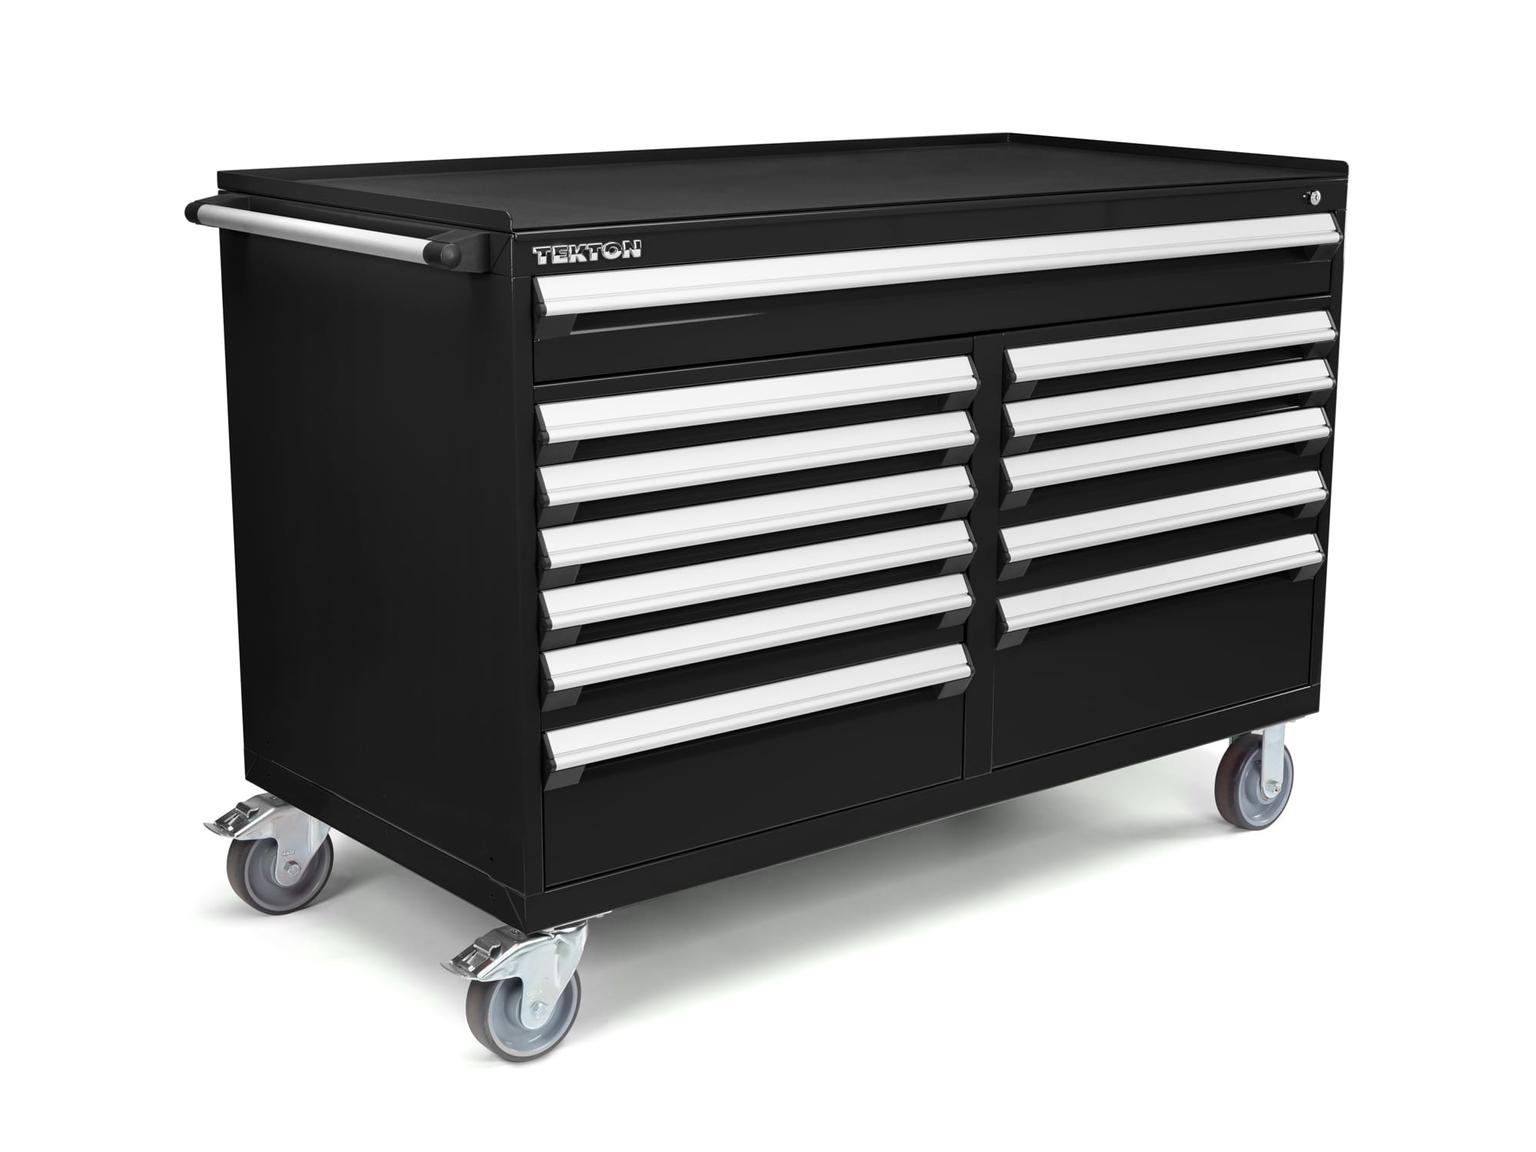 TEKTON ORG75101-T 60 Inch Wide 12-Drawer Tool Cabinet, Carbon (60" W x 42.5" H x 30" D)